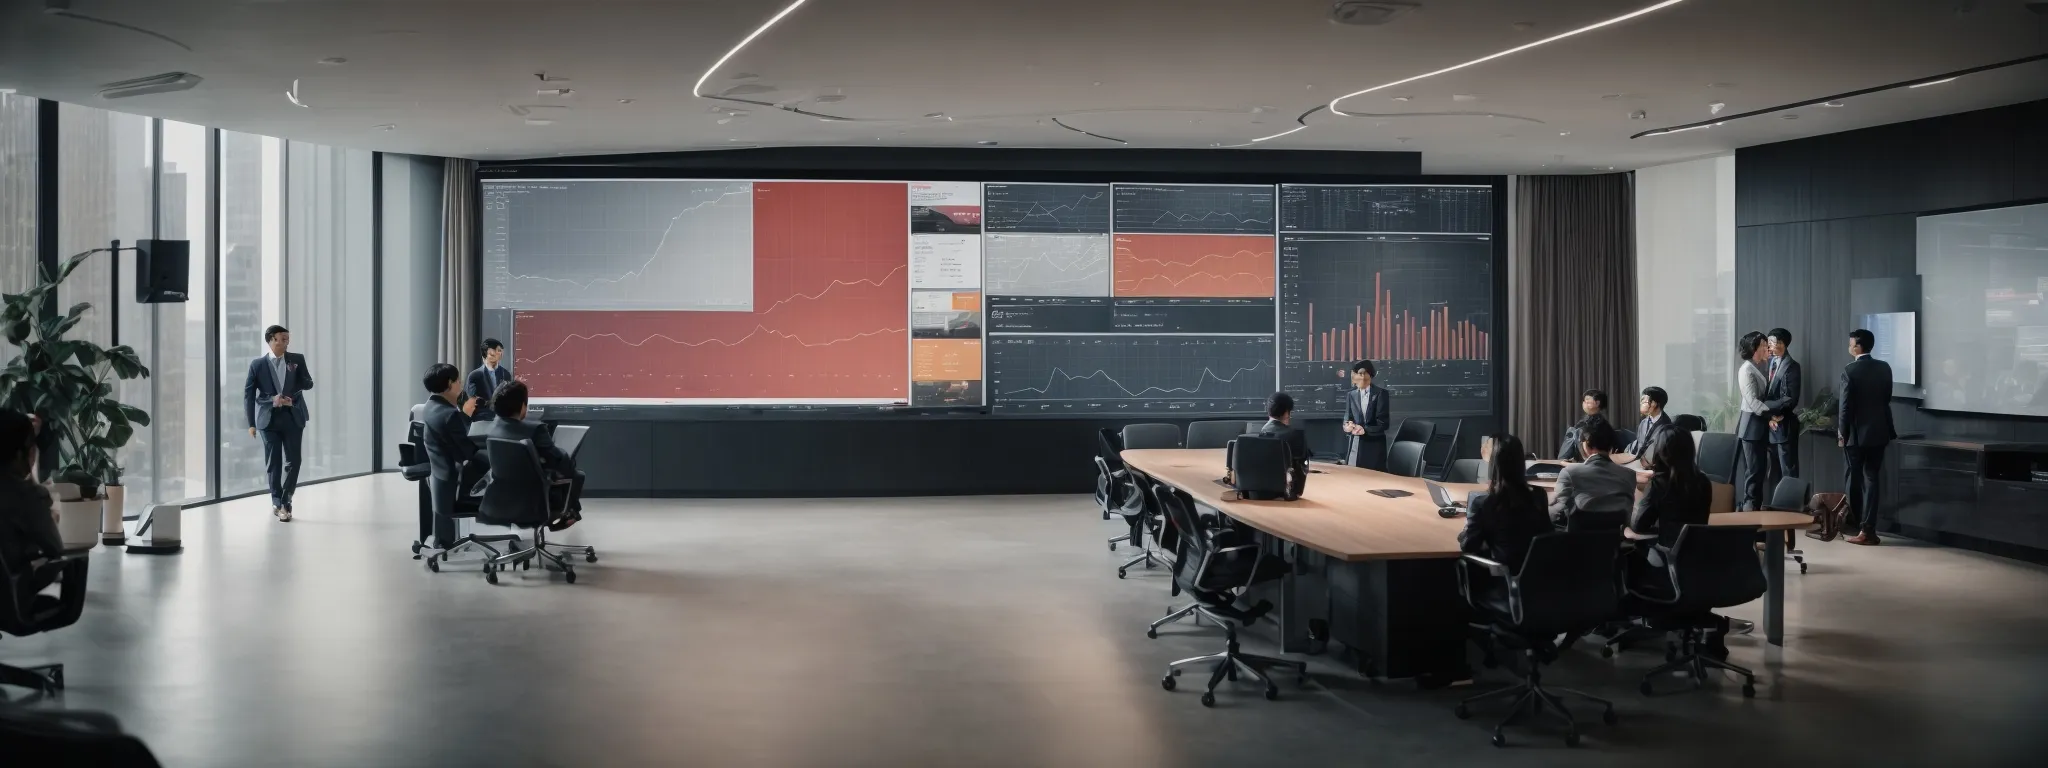 a conference room showcasing a large screen with data analytics graphs and a diverse team of professionals actively engaged in discussion.